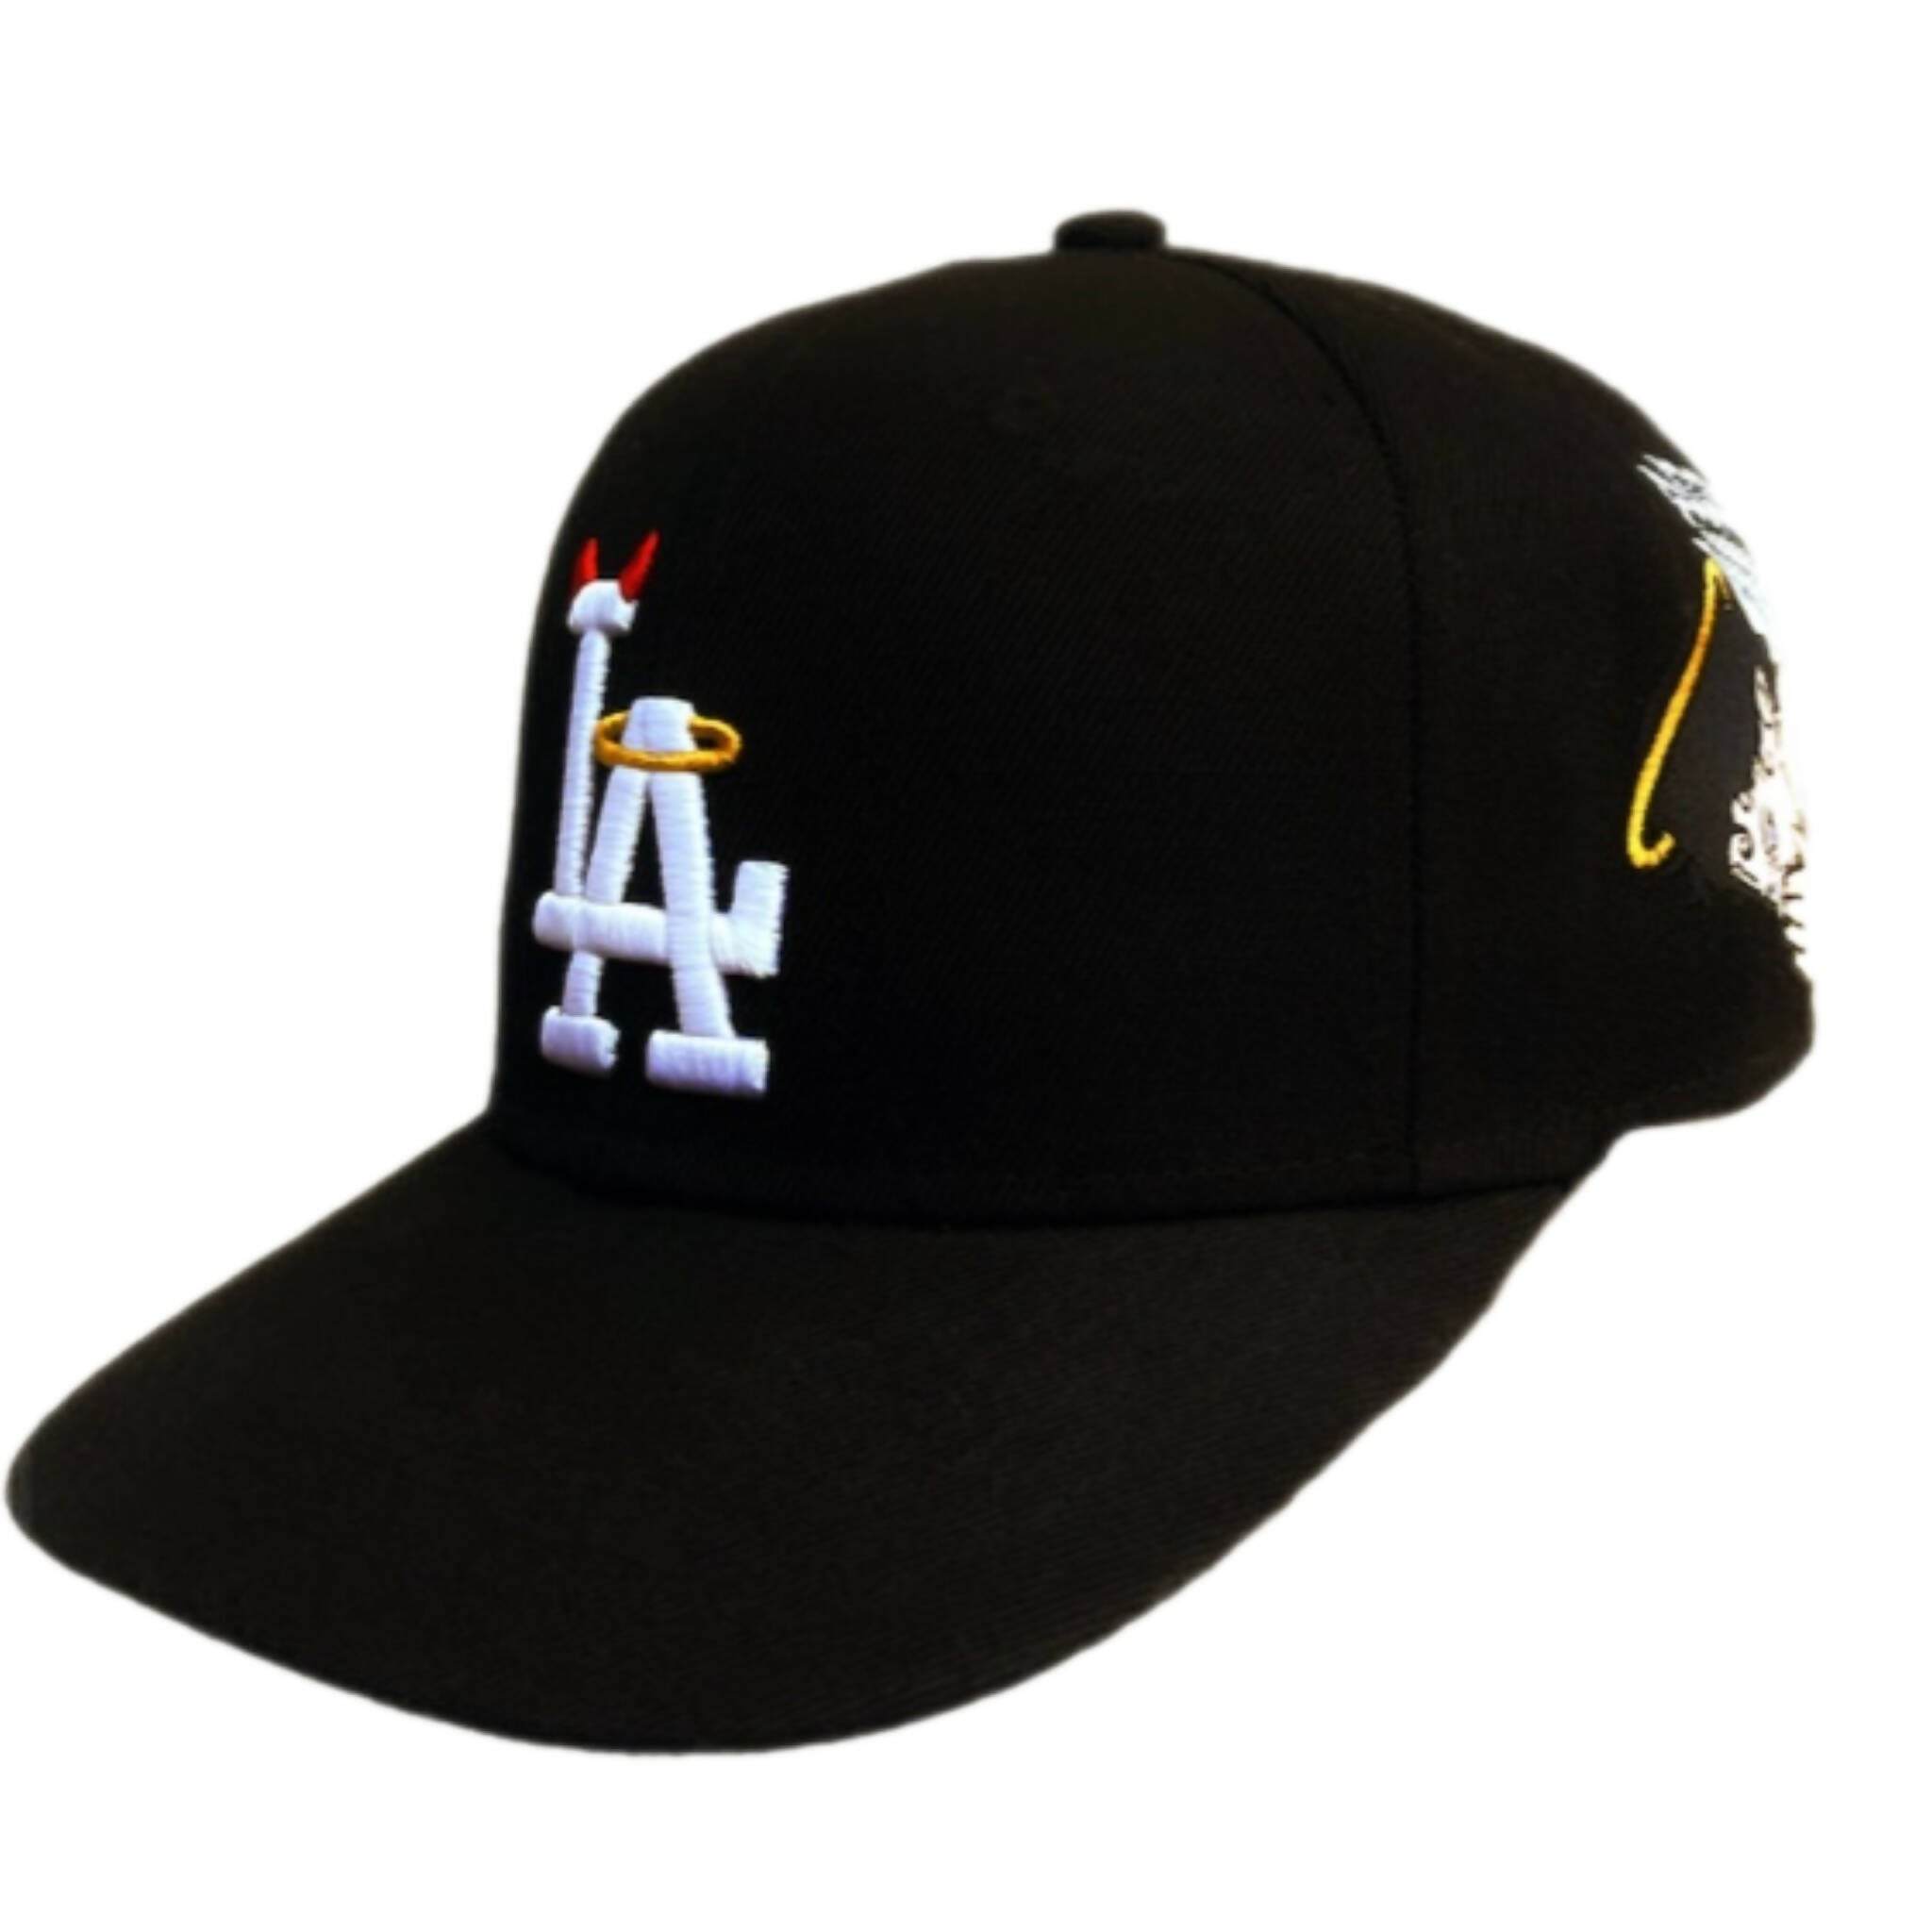 LA WHISPERS FITTED HAT [Medium]